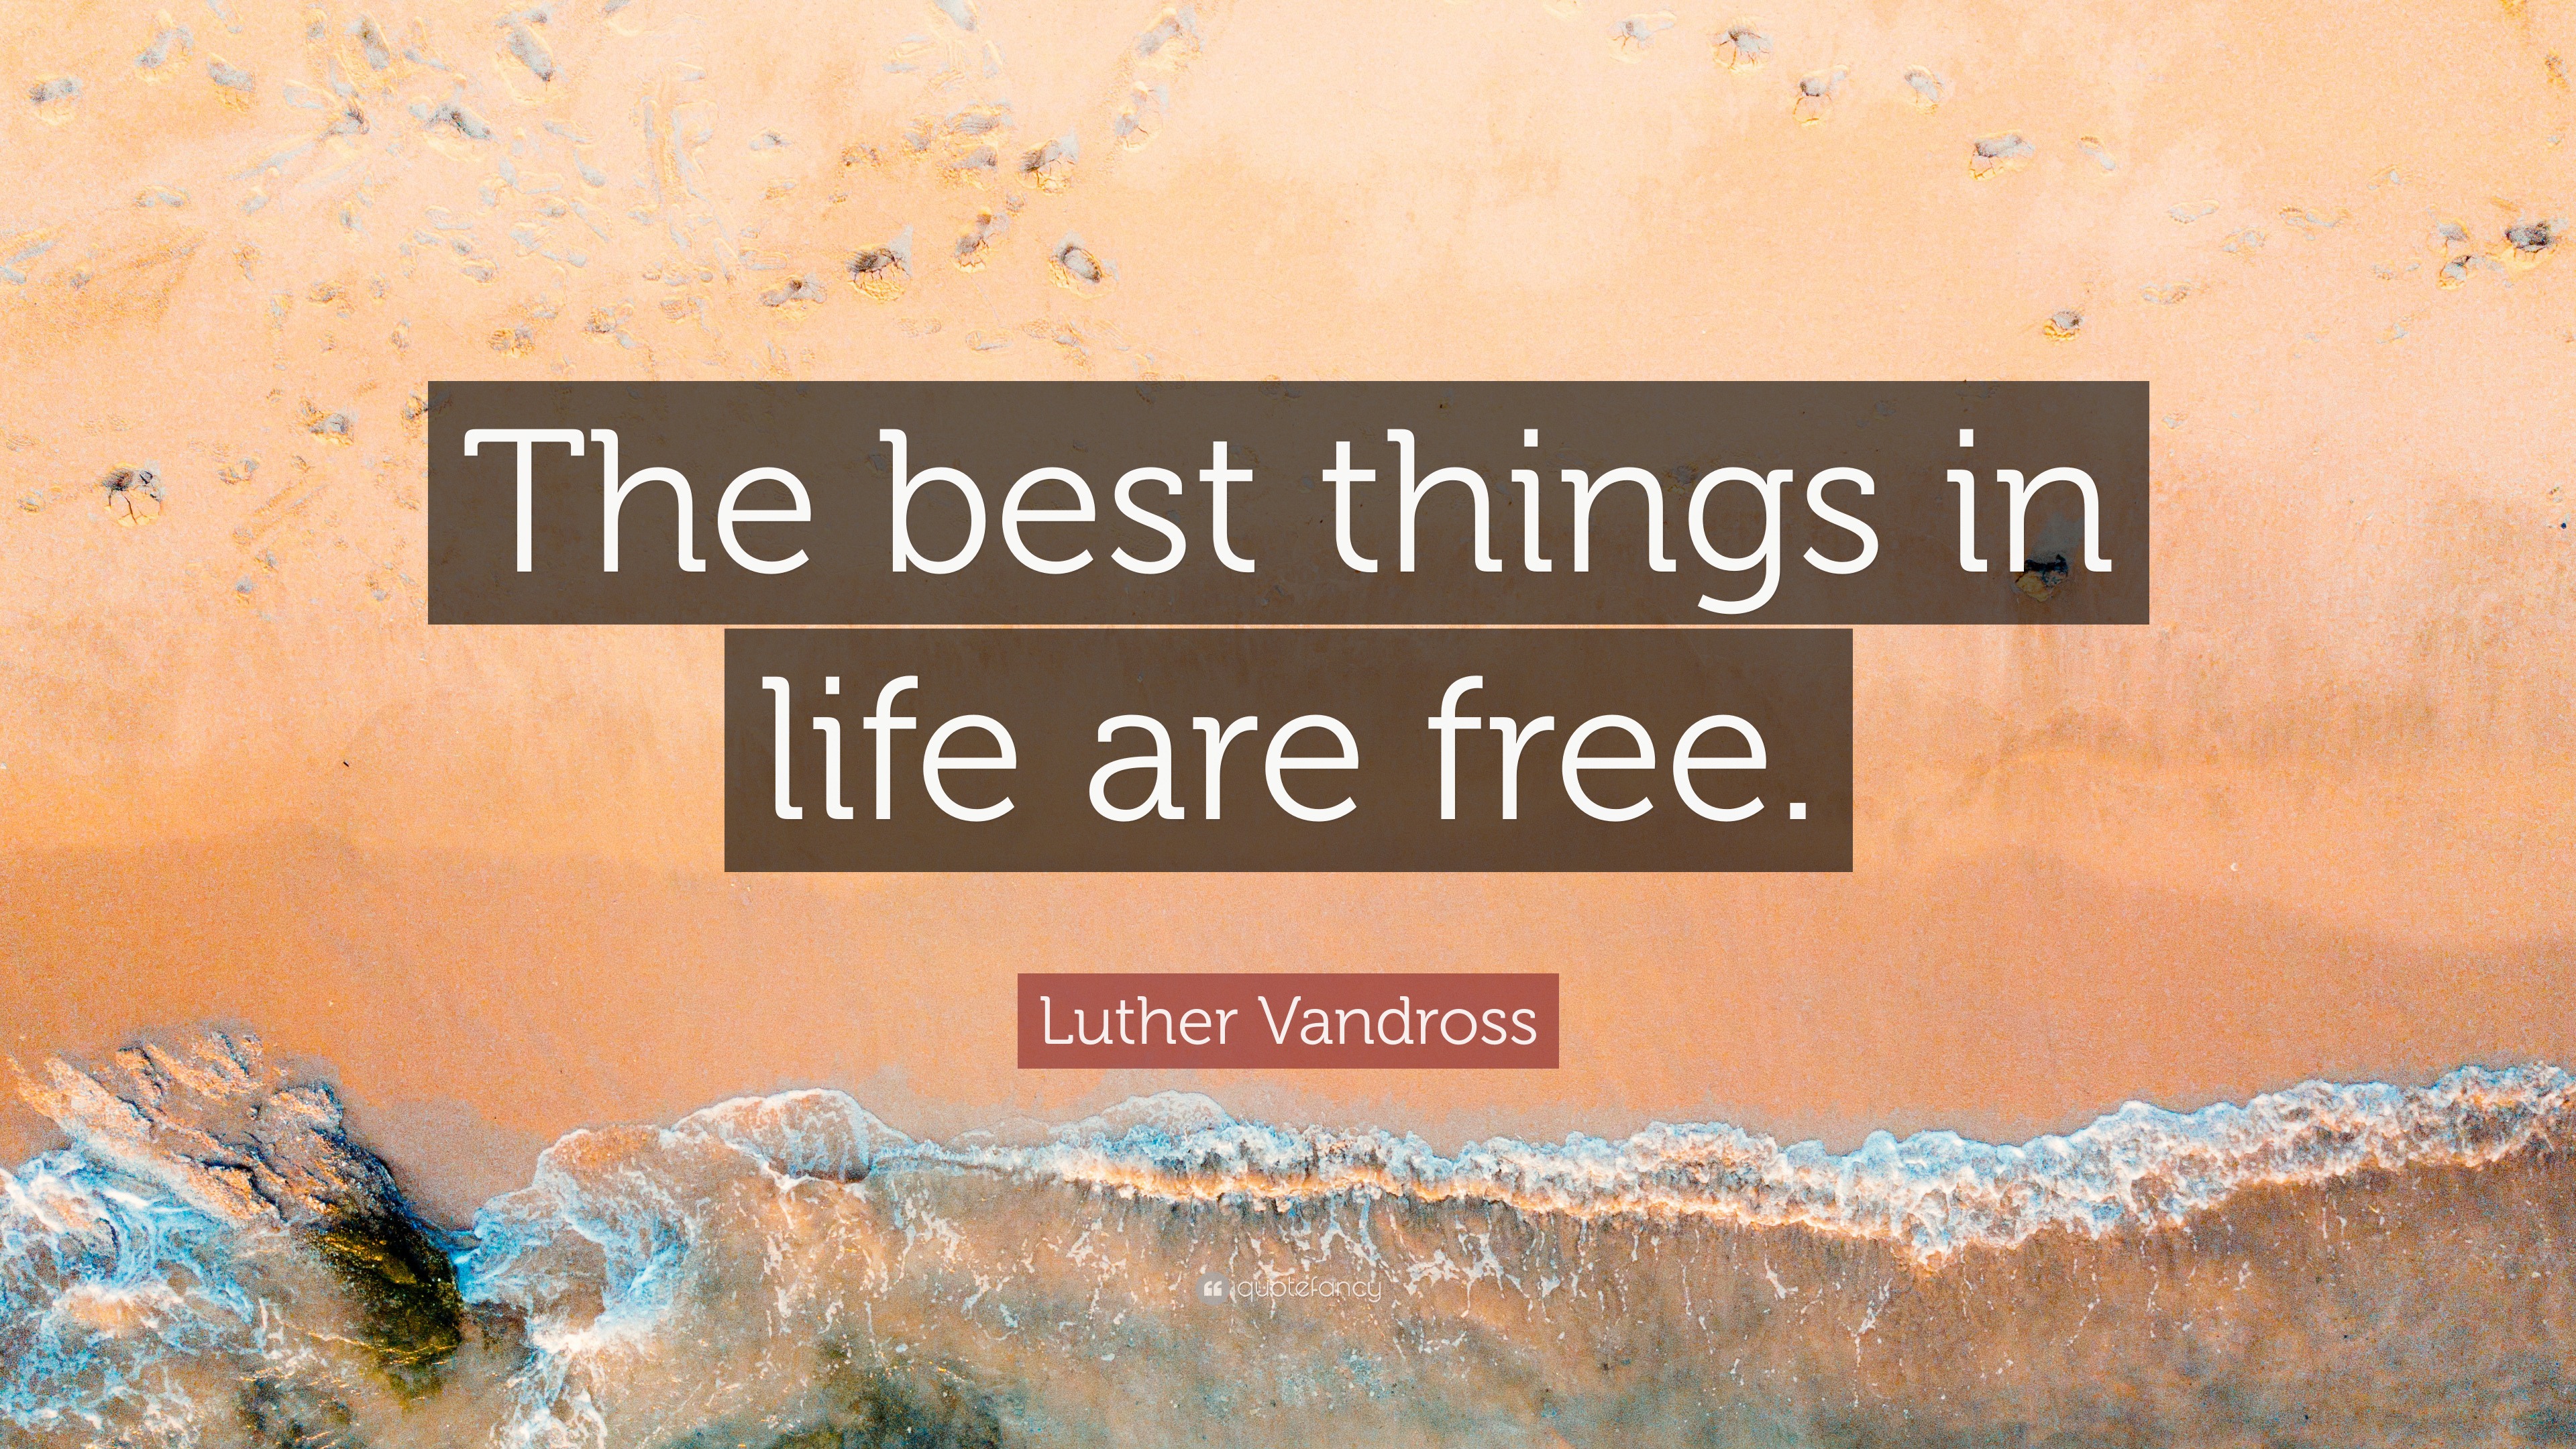 Luther Vandross Quote “The best things in life are free ”